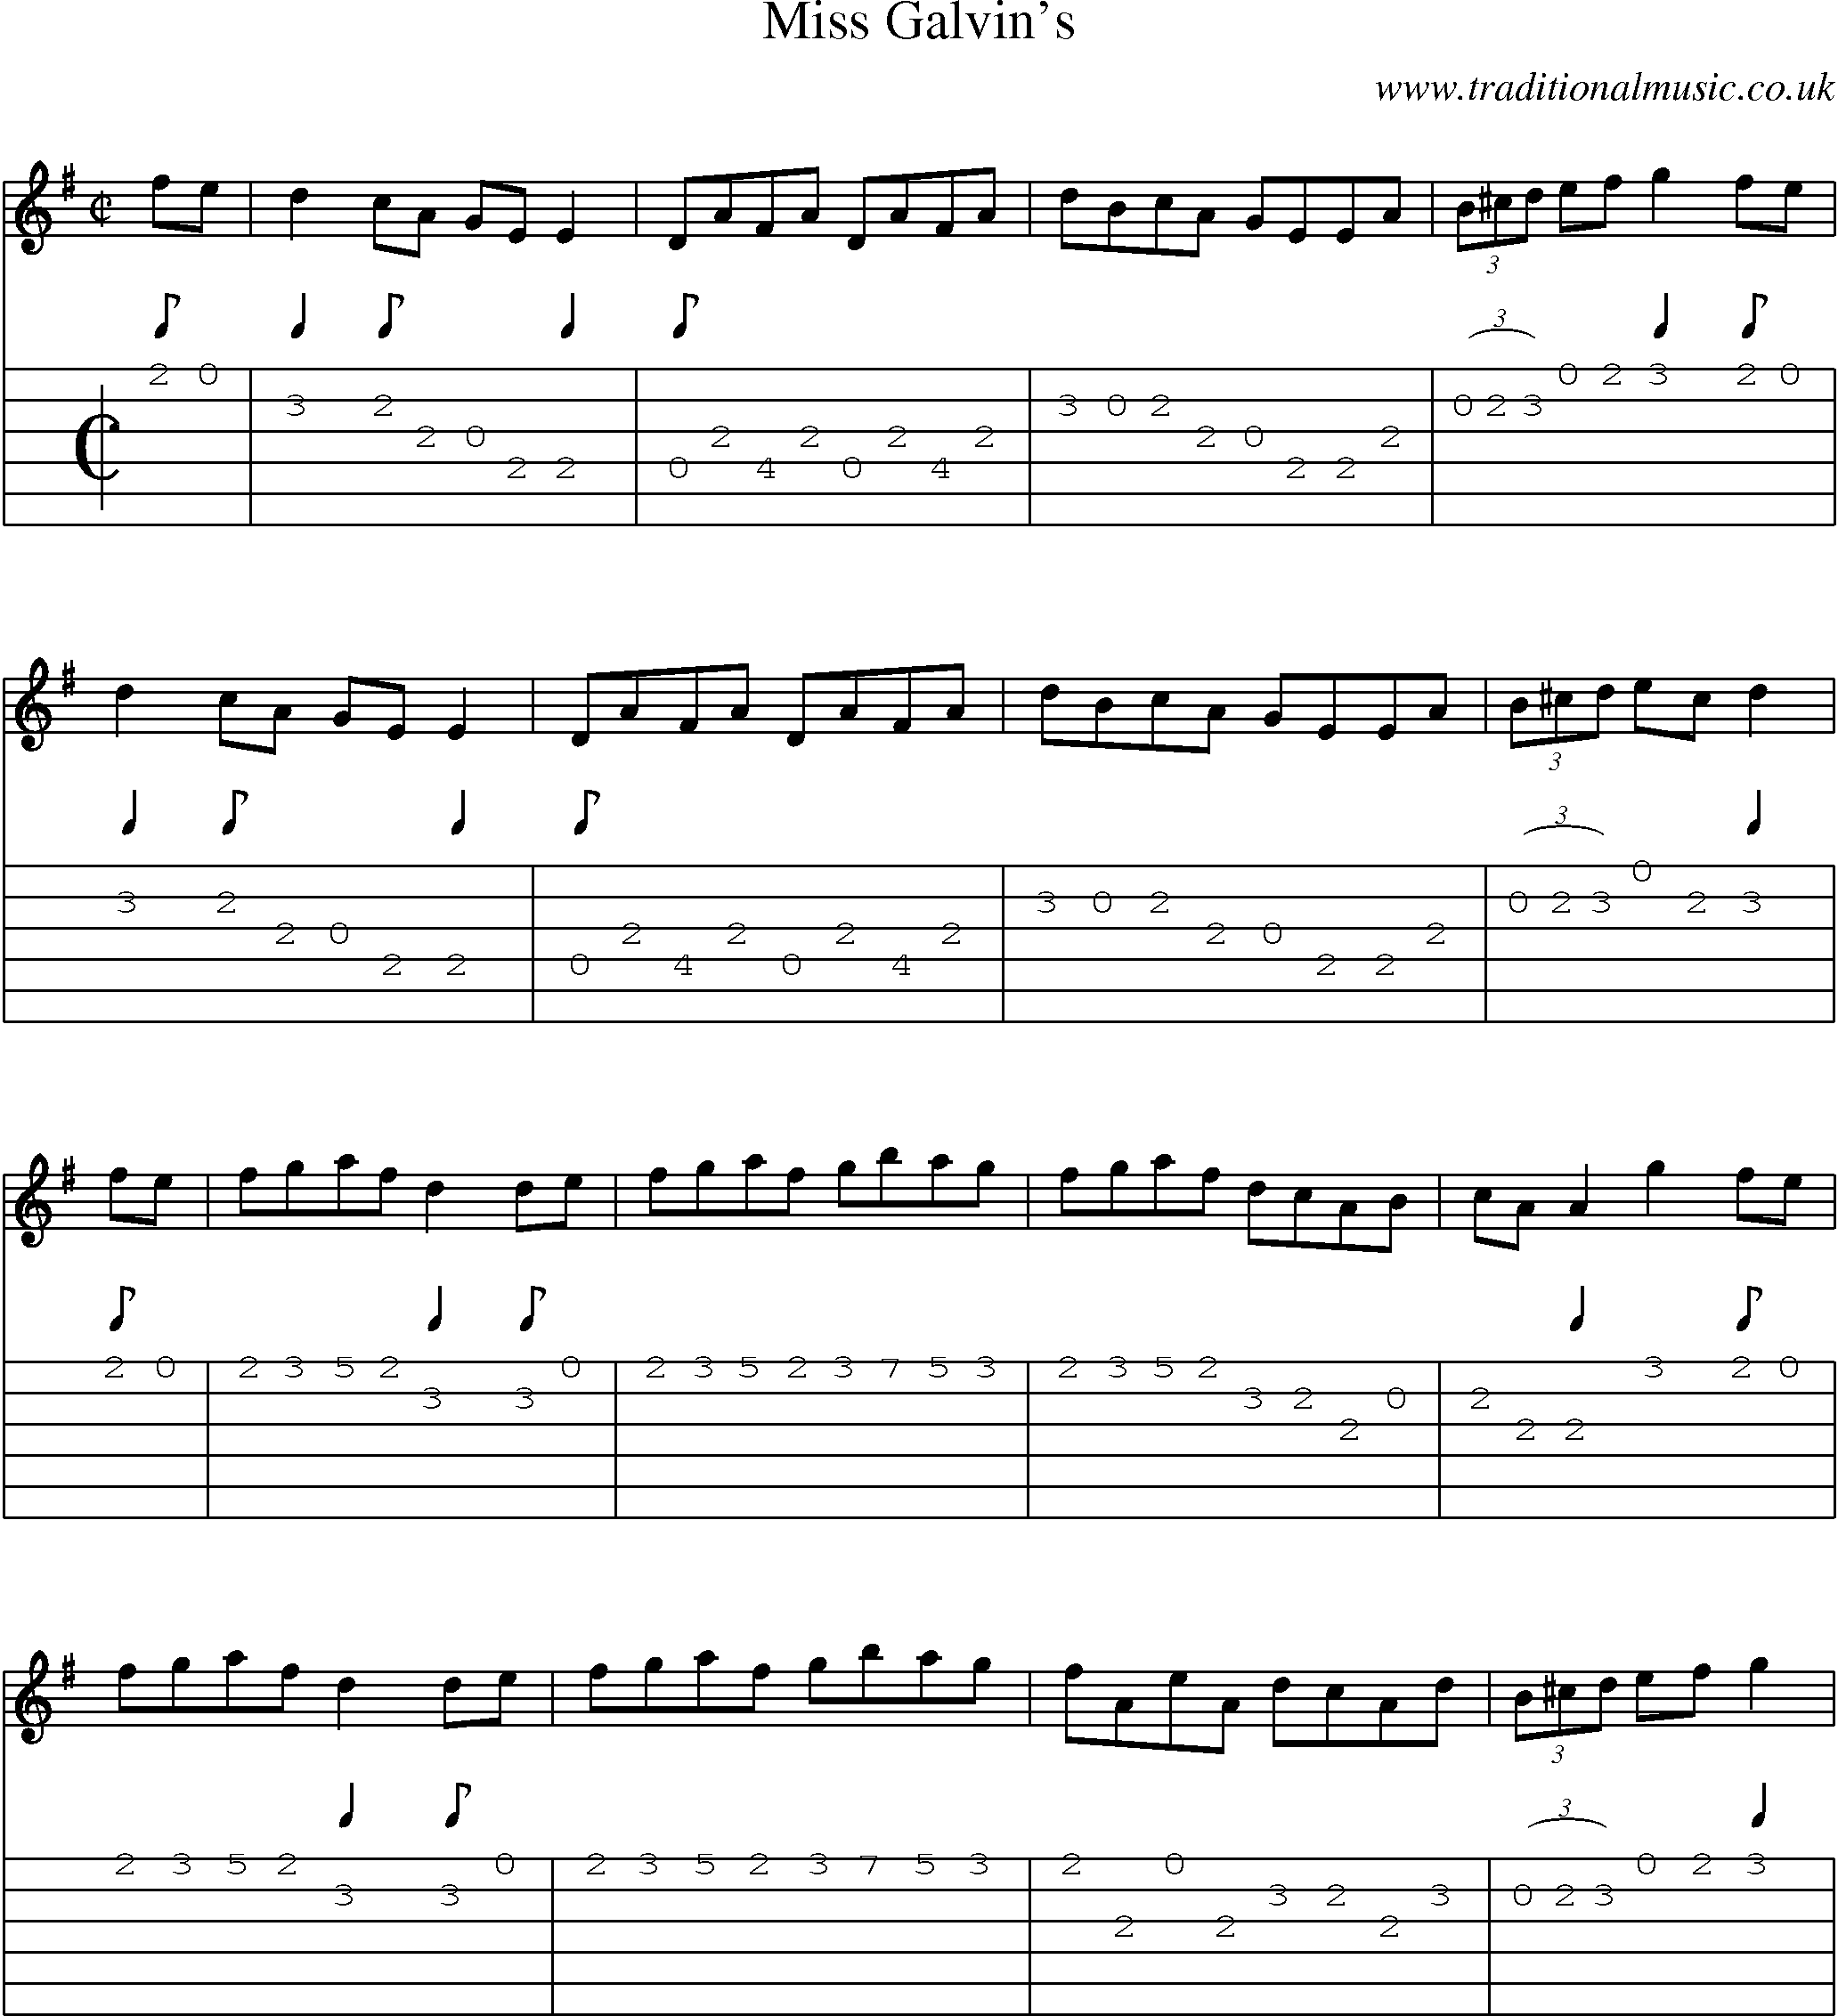 Music Score and Guitar Tabs for Miss Galvins